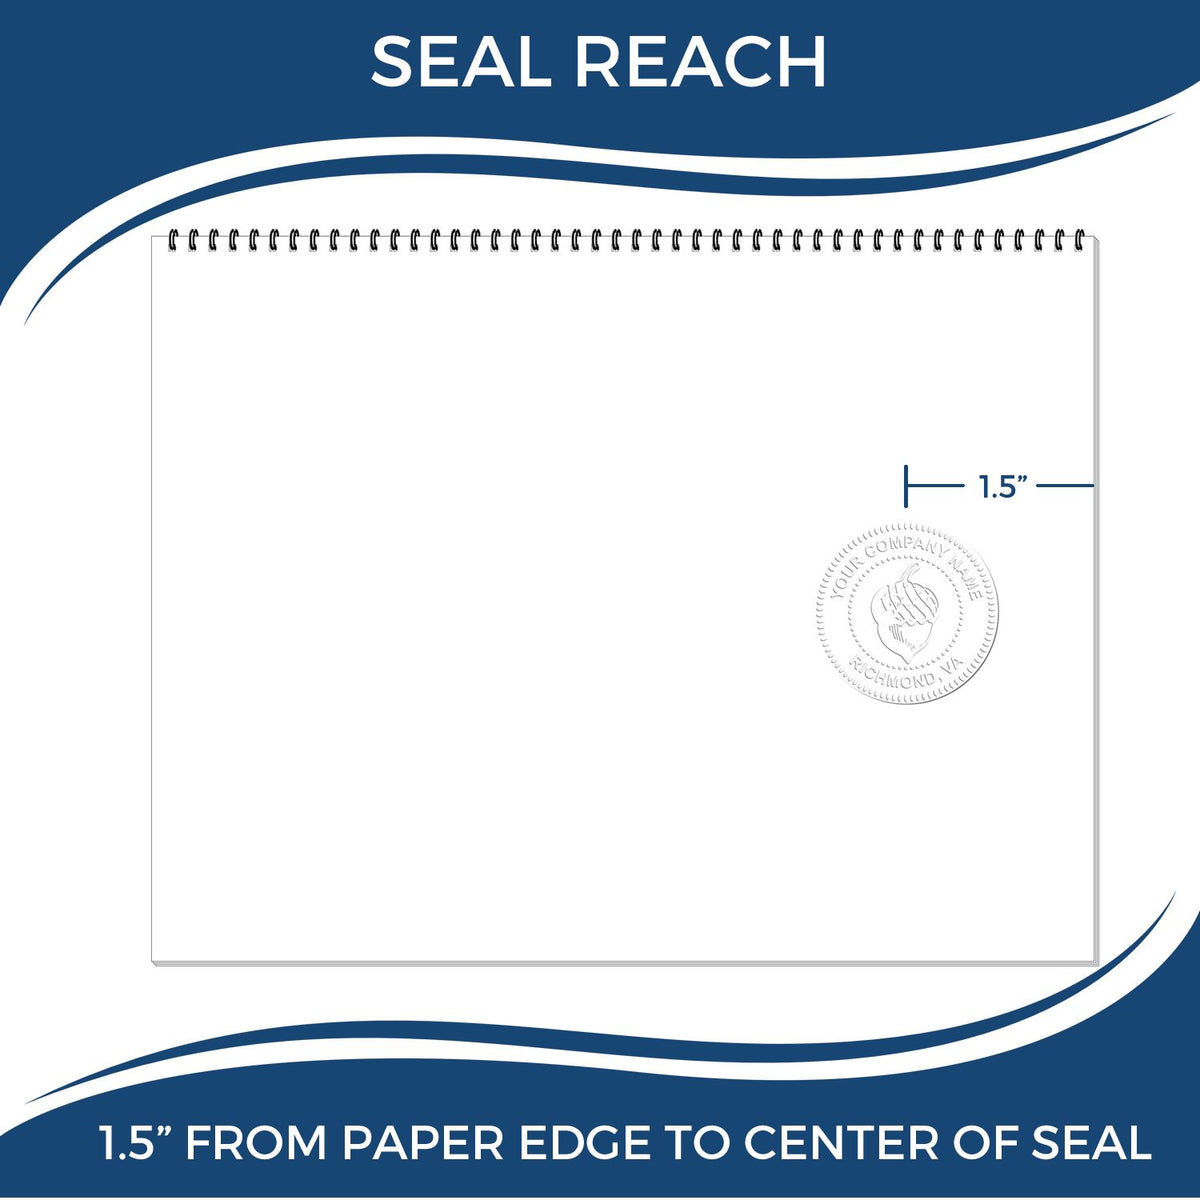 An infographic showing the seal reach which is represented by a ruler and a miniature seal image of the Maryland Desk Architect Embossing Seal